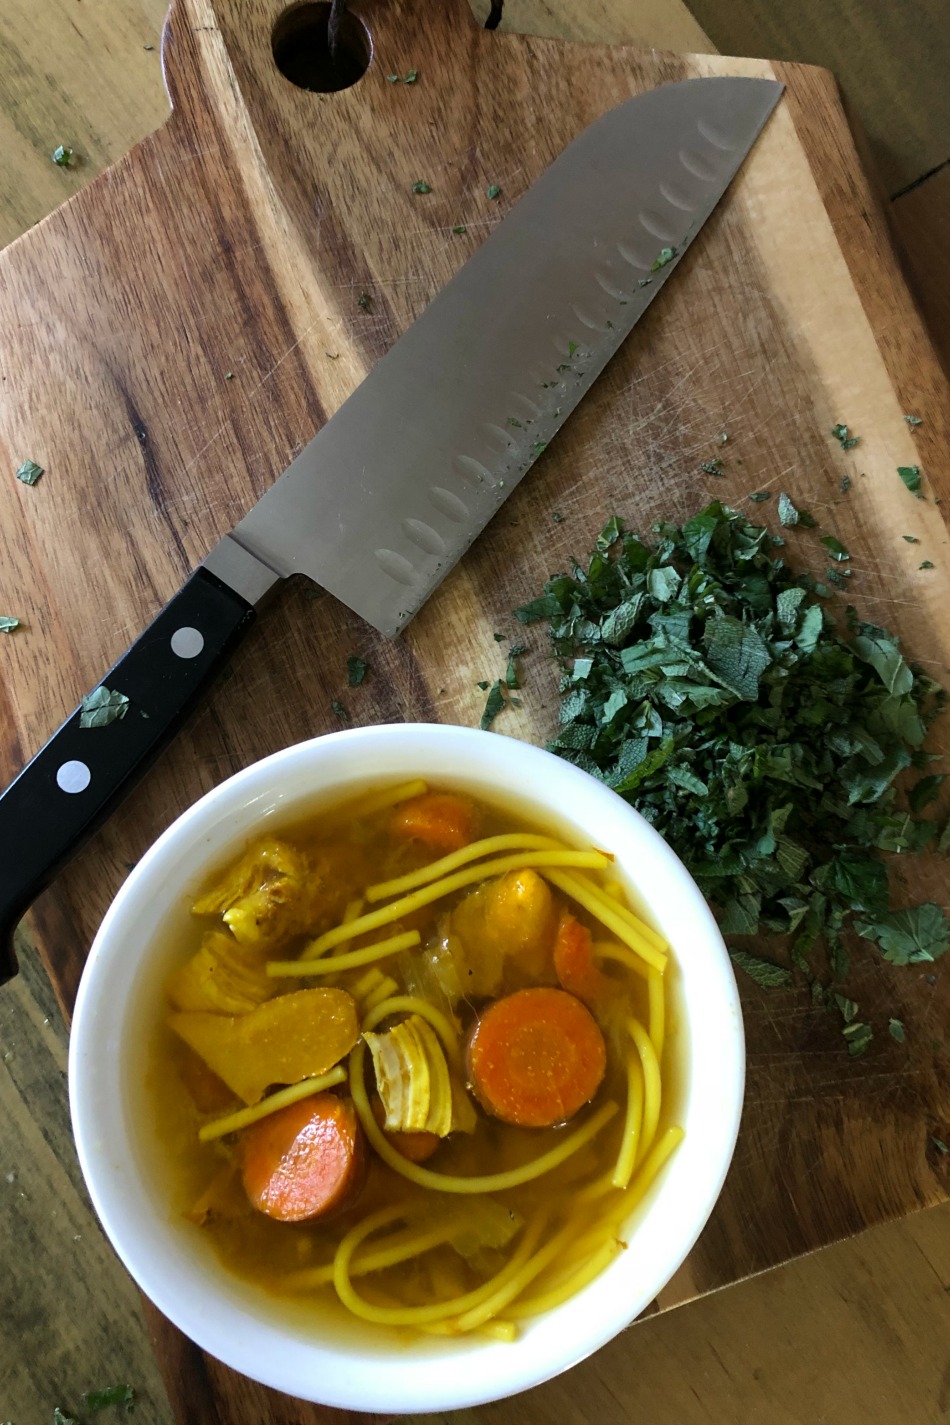 Immune-Supportive Turmeric-Ginger Chicken Noodle Soup | Growing Up Herbal | If you're looking for healthy foods for cold and flu season, you won't want to miss this spicy, immune-supportive turmeric-ginger chicken noodle soup!